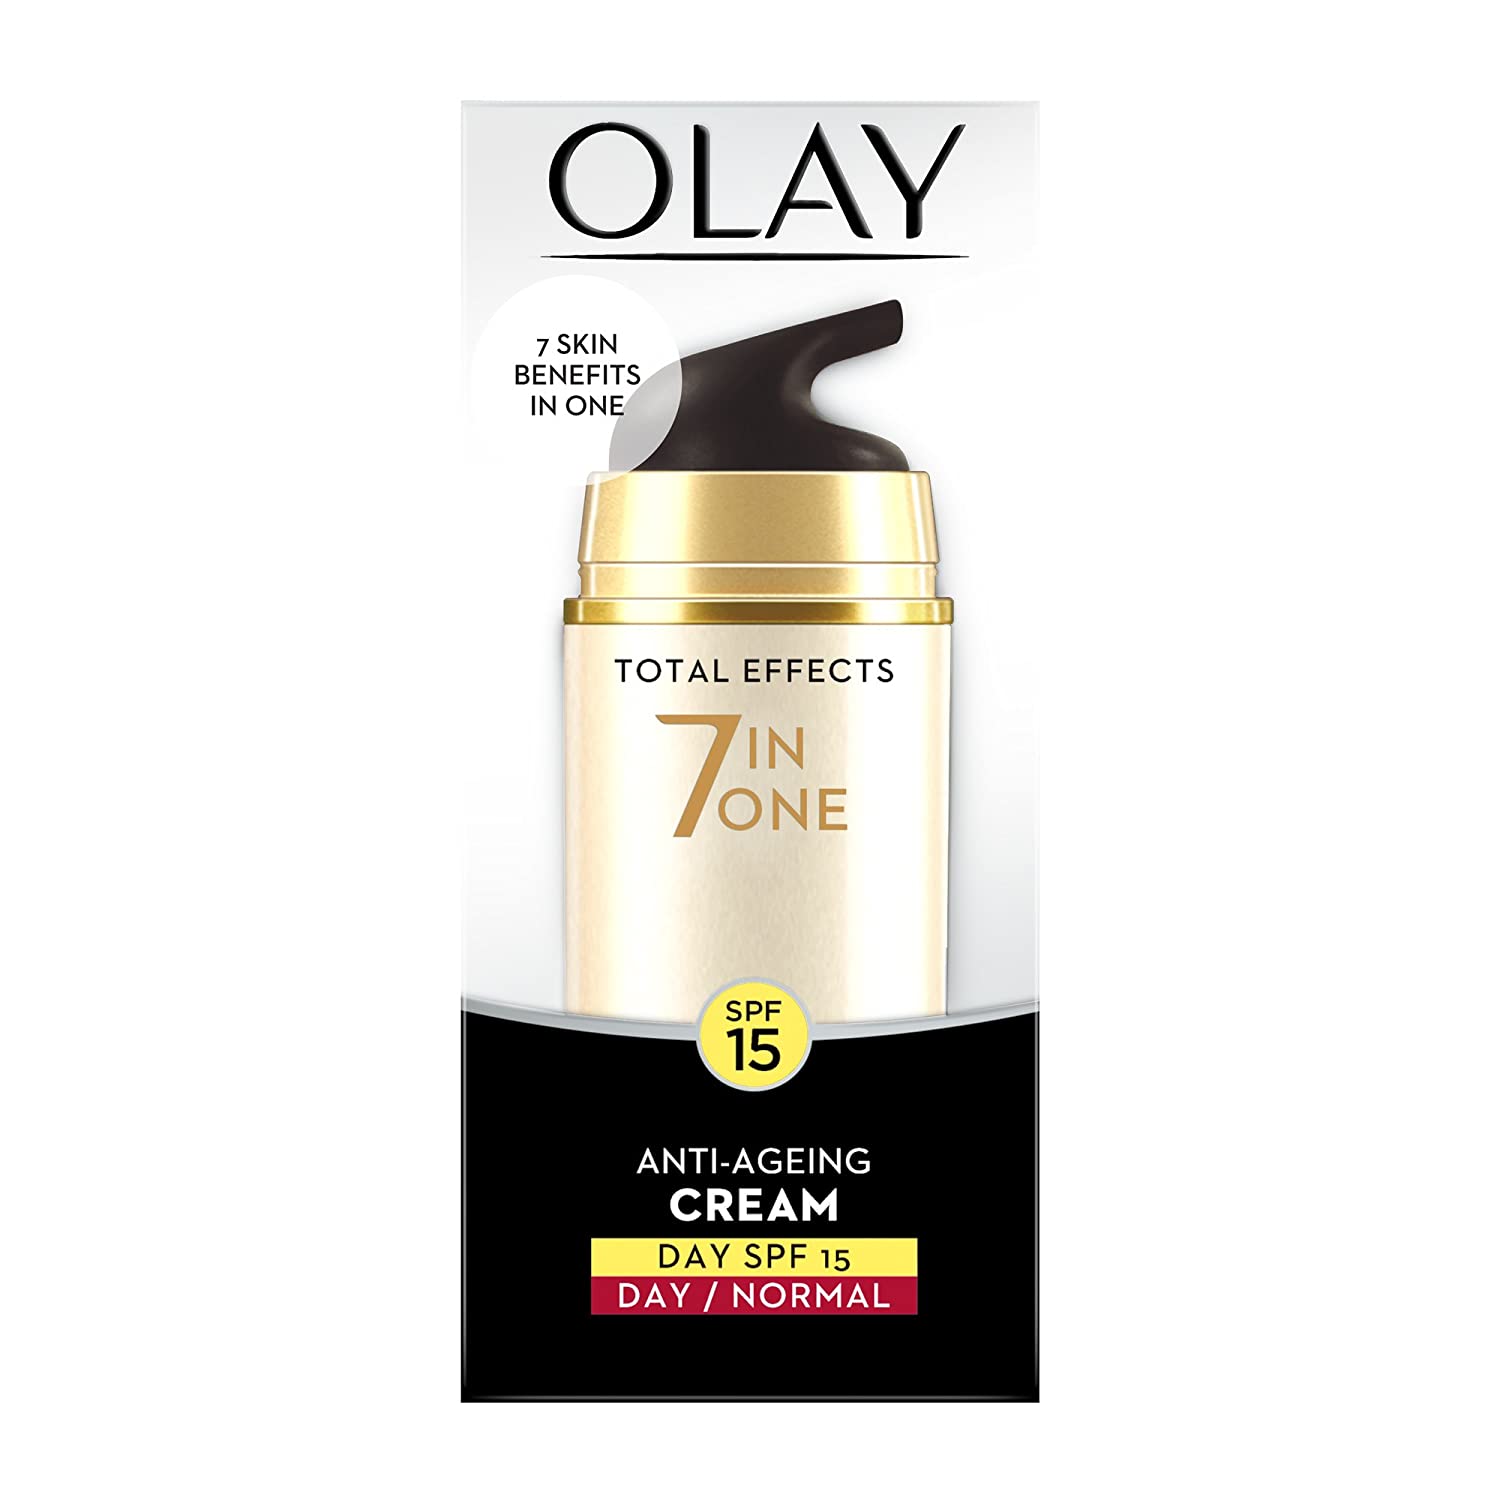 Olay Total Effects SPF 15 Anti-Ageing Cream, 20 gm, Pack of 1 